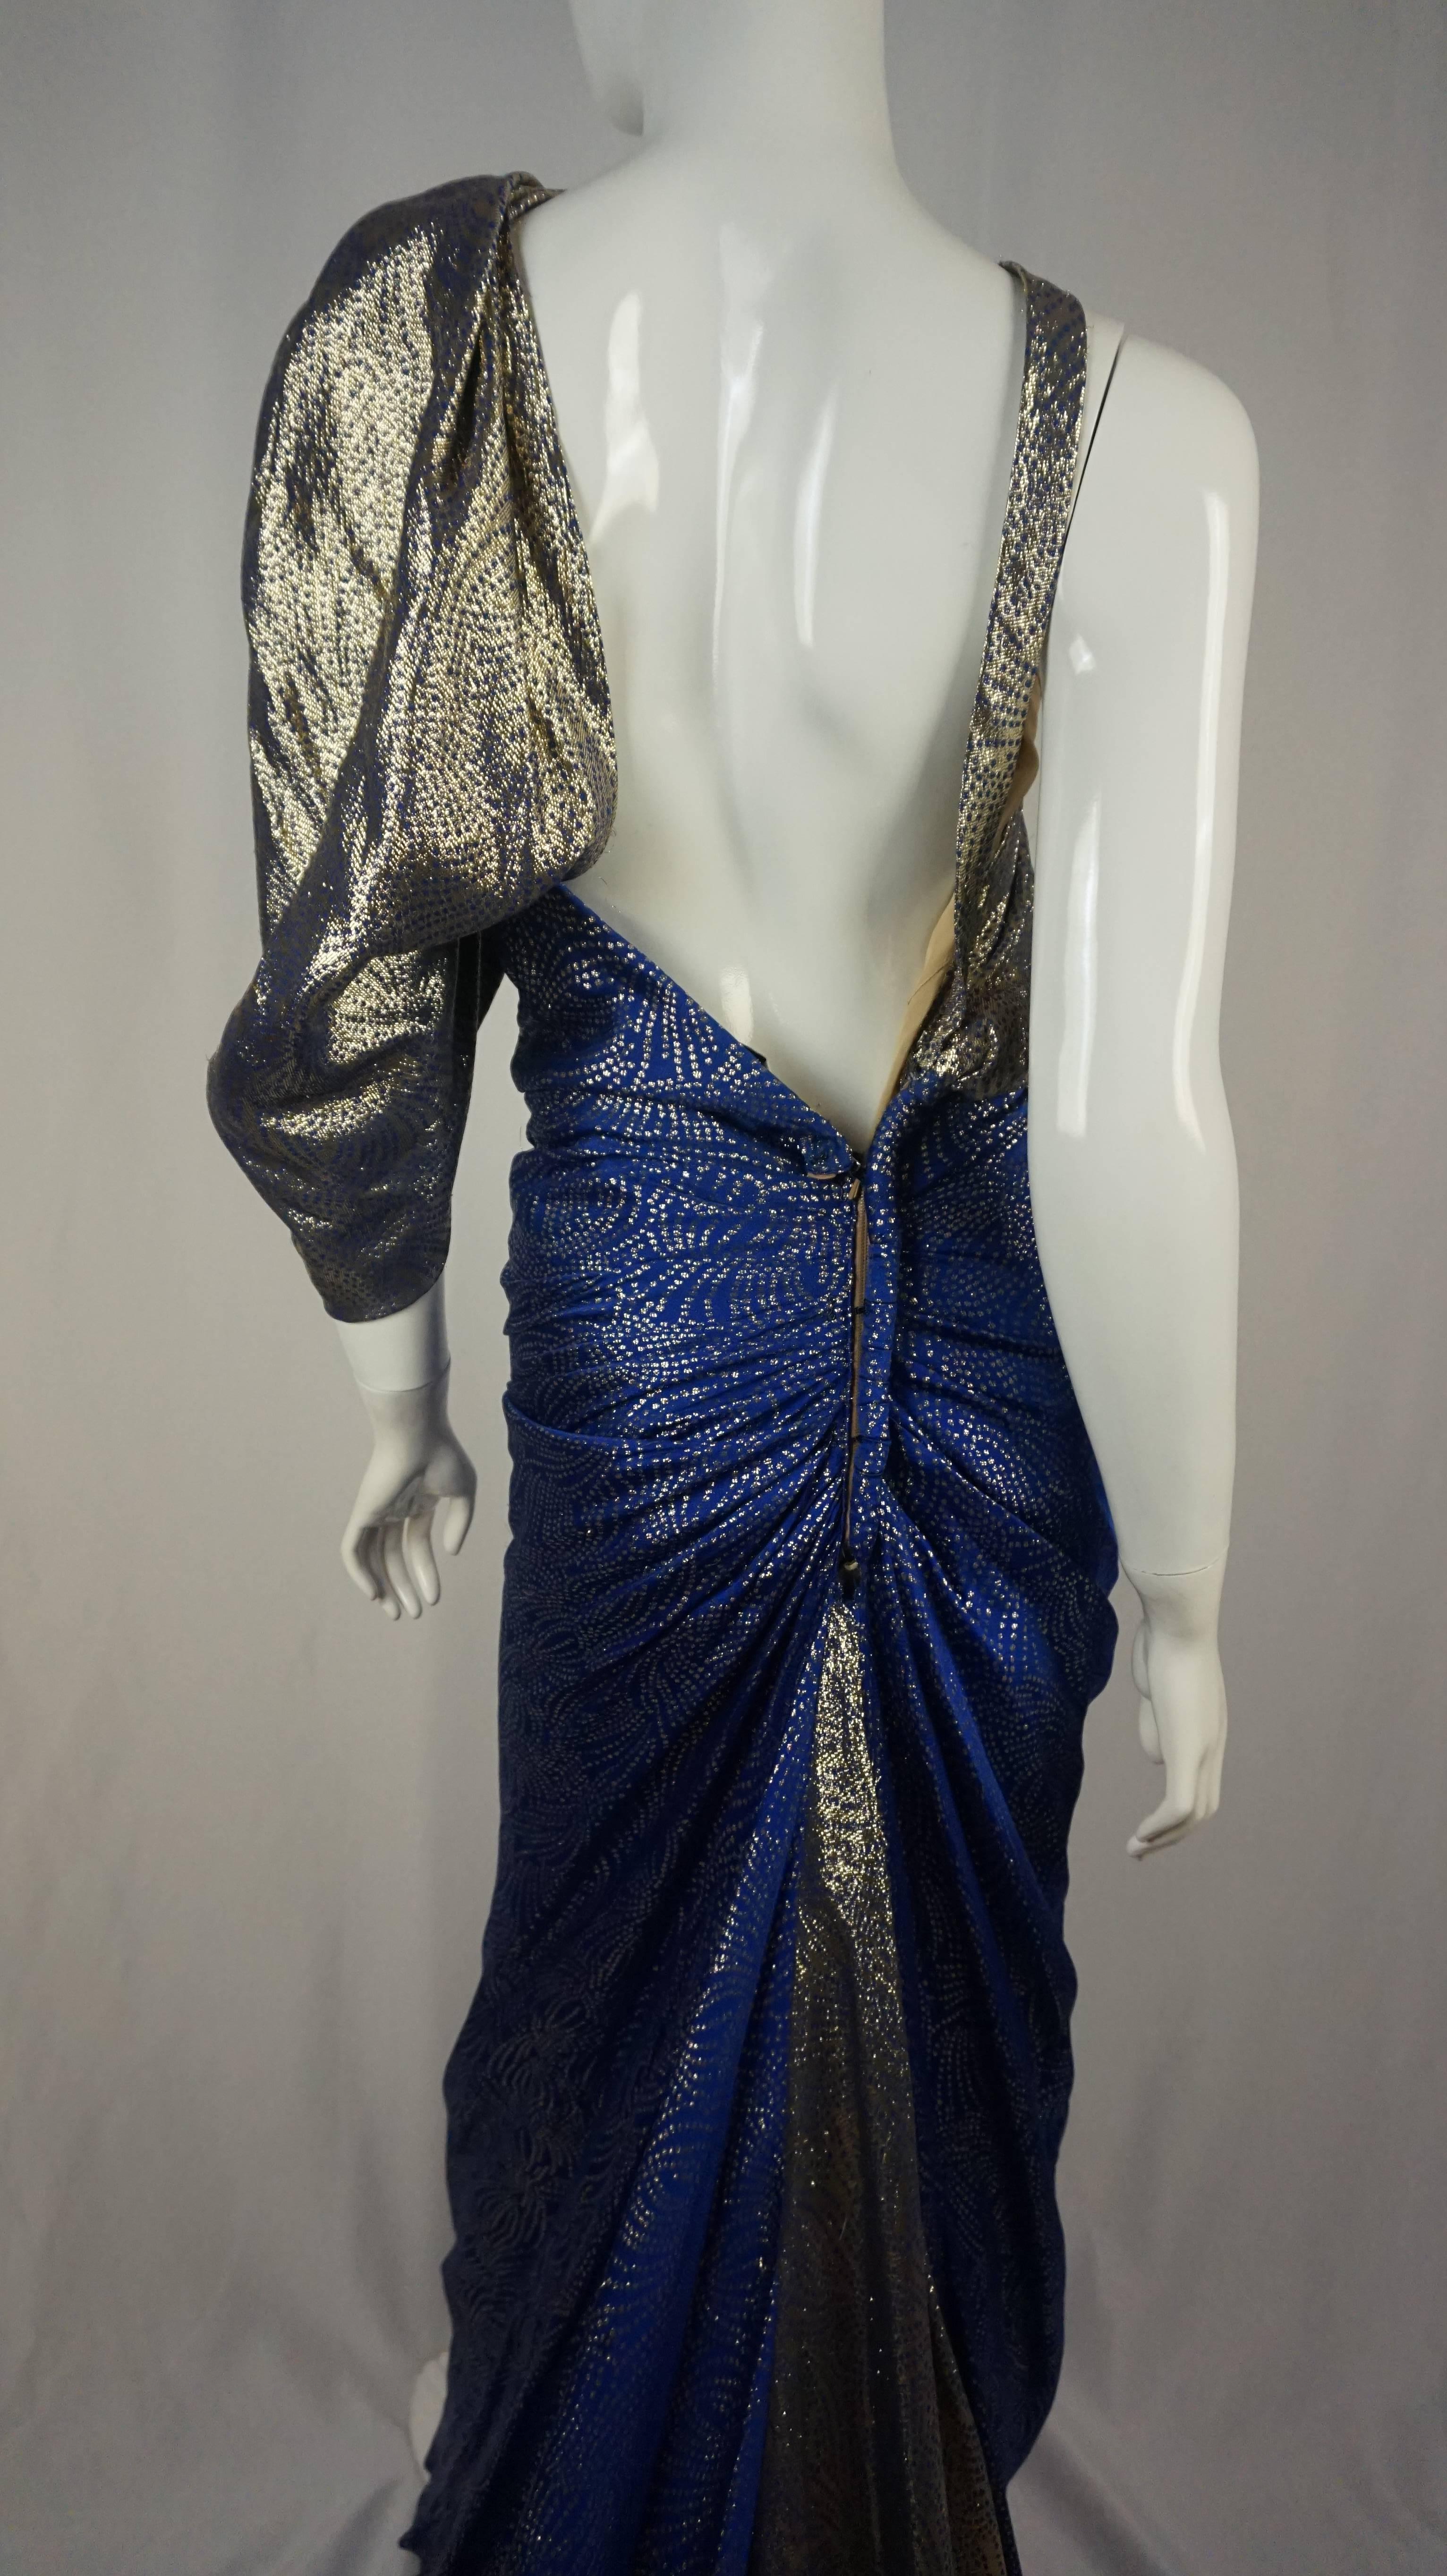 1980s Lame Jacqueline De Ribes One Shoulder Mermaid Cerulian and Gold In Excellent Condition For Sale In West Hollywood, CA